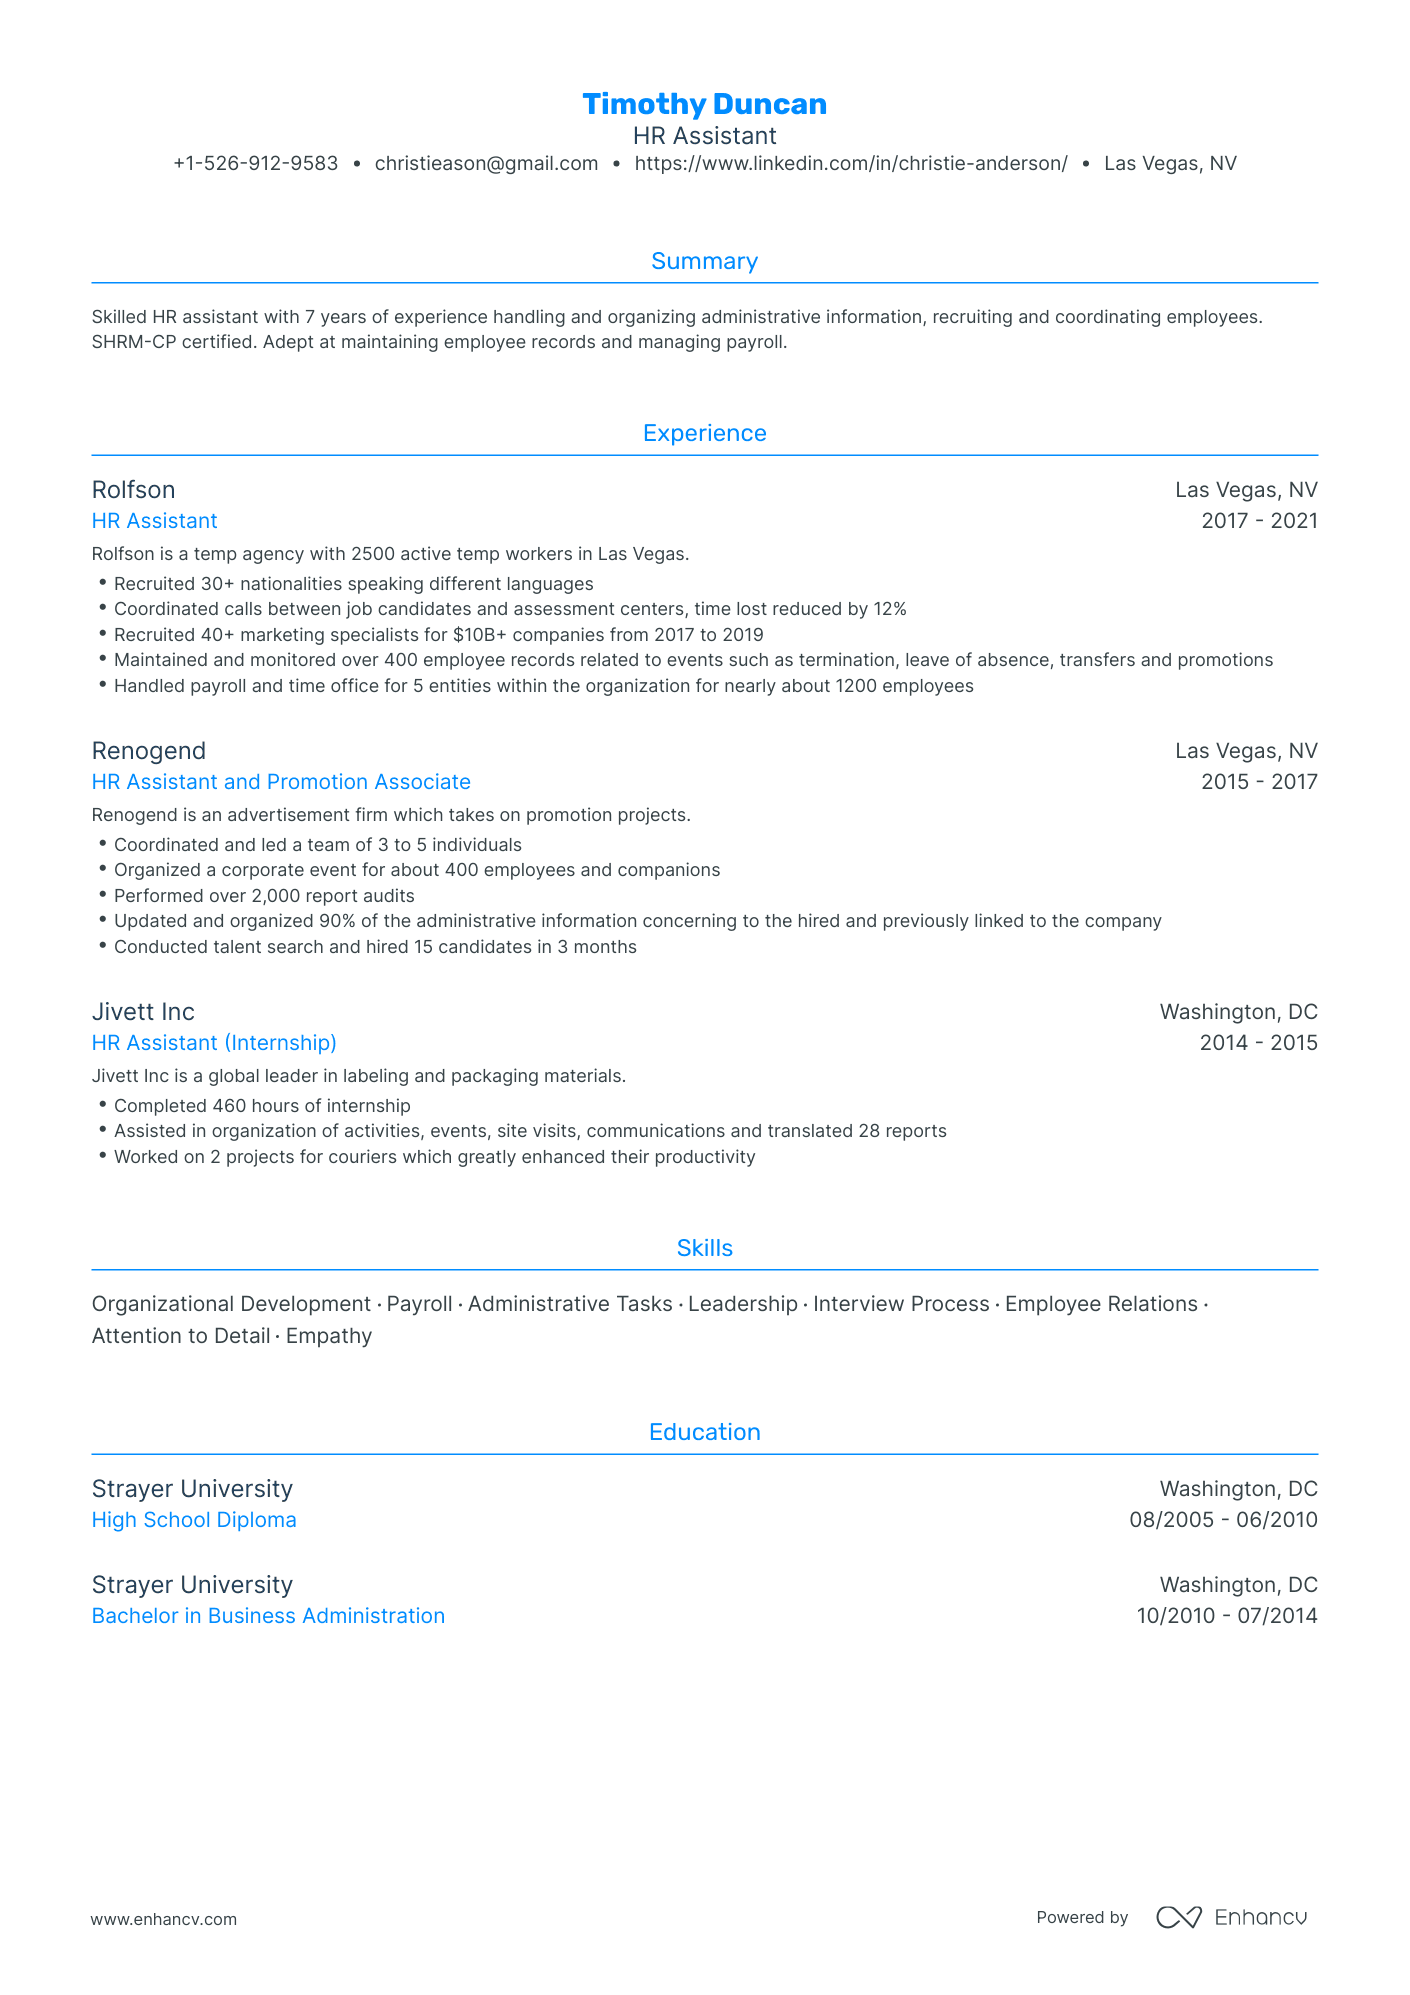 Traditional HR Assistant Resume Template